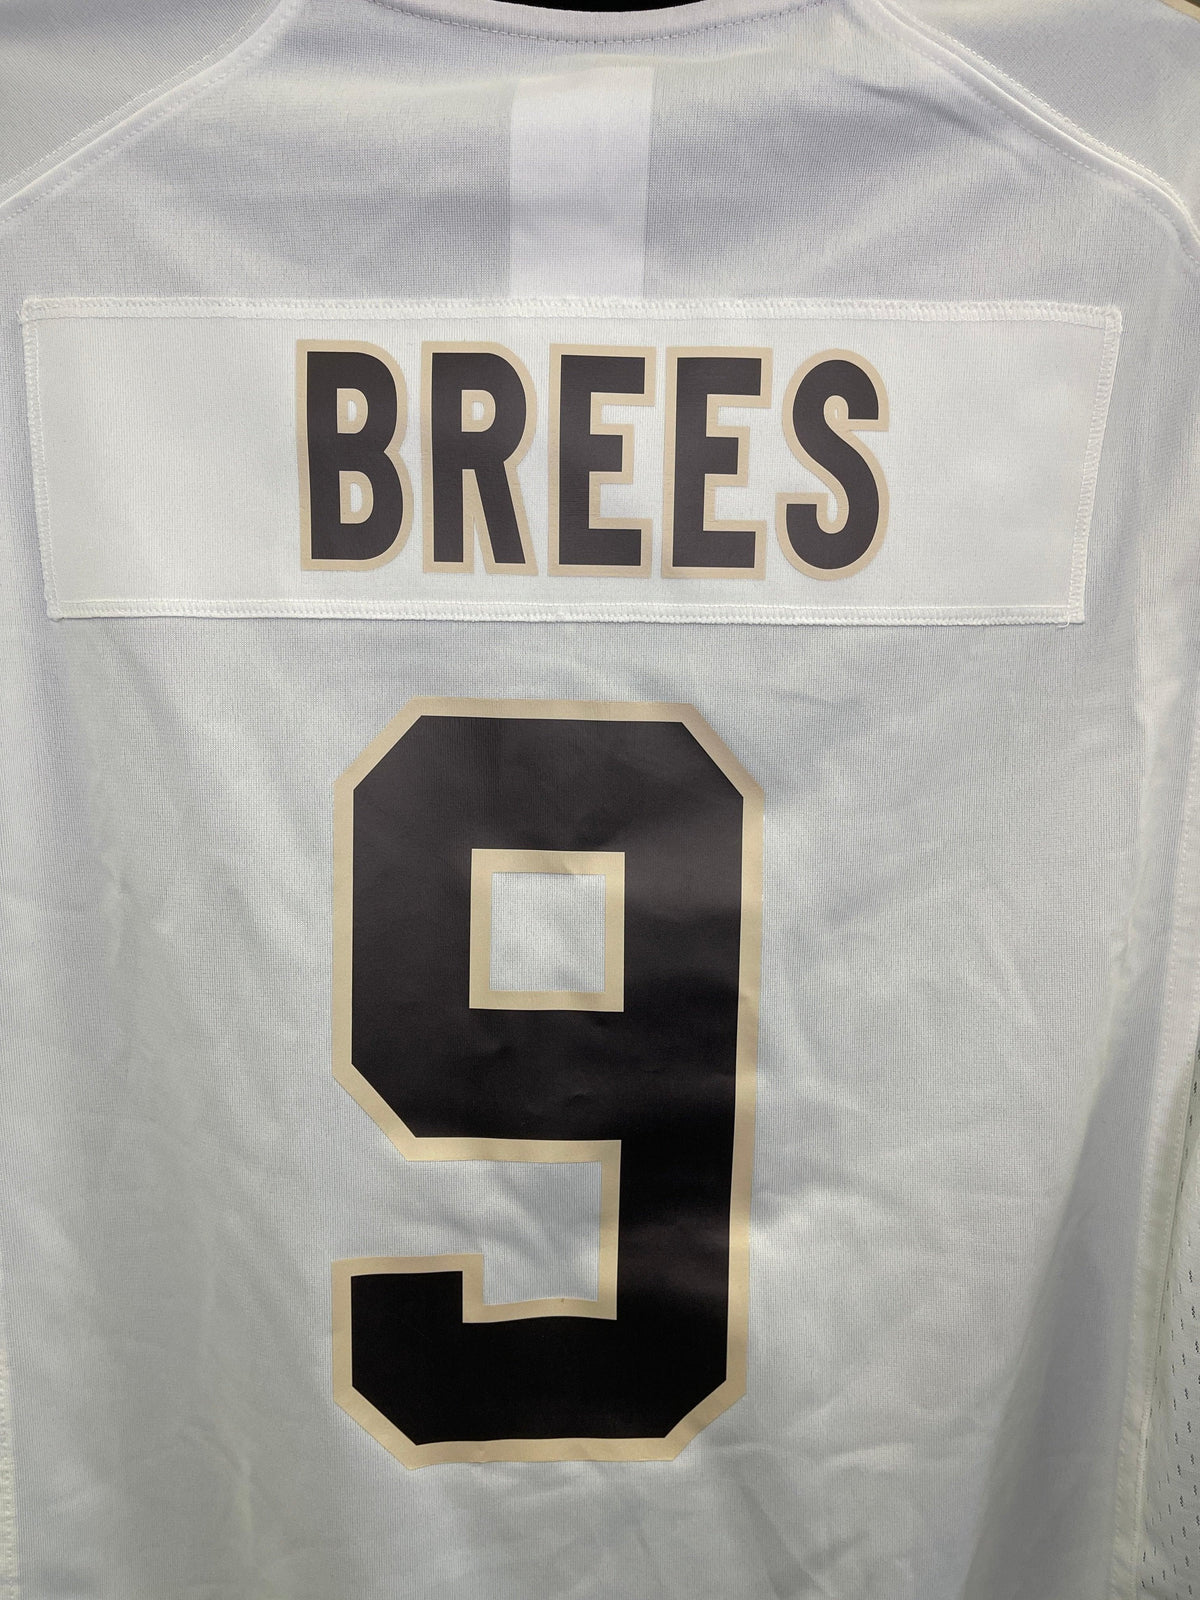 NFL New Orleans Saints Brees #9 Game Jersey Men's Large NWT